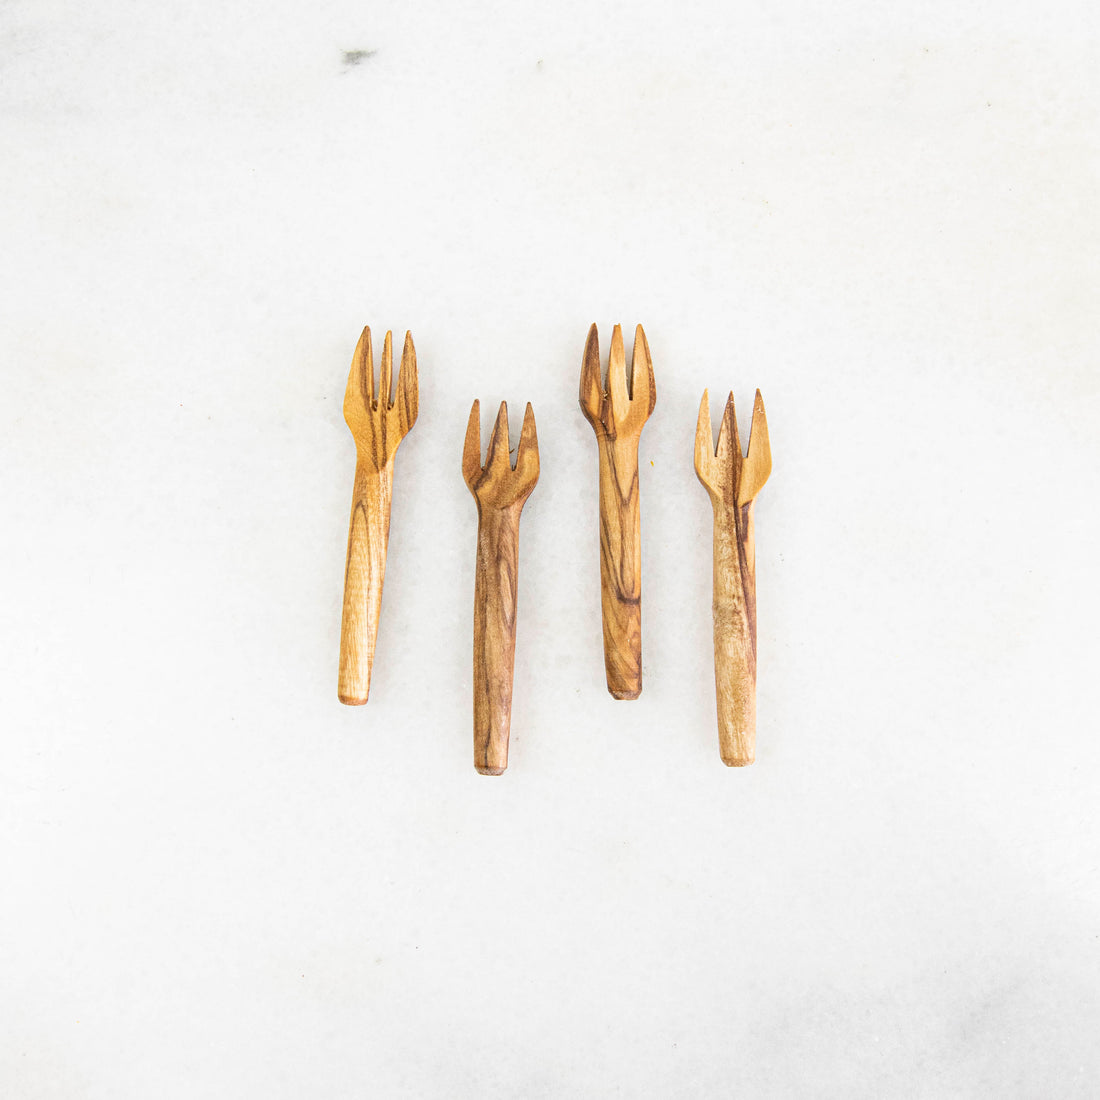 A set of Mini Olive Wood Appetizer Forks (Set of Four) from Natural Olivewood beside a piece of cheese on a wooden cutting board, ready for hors d&